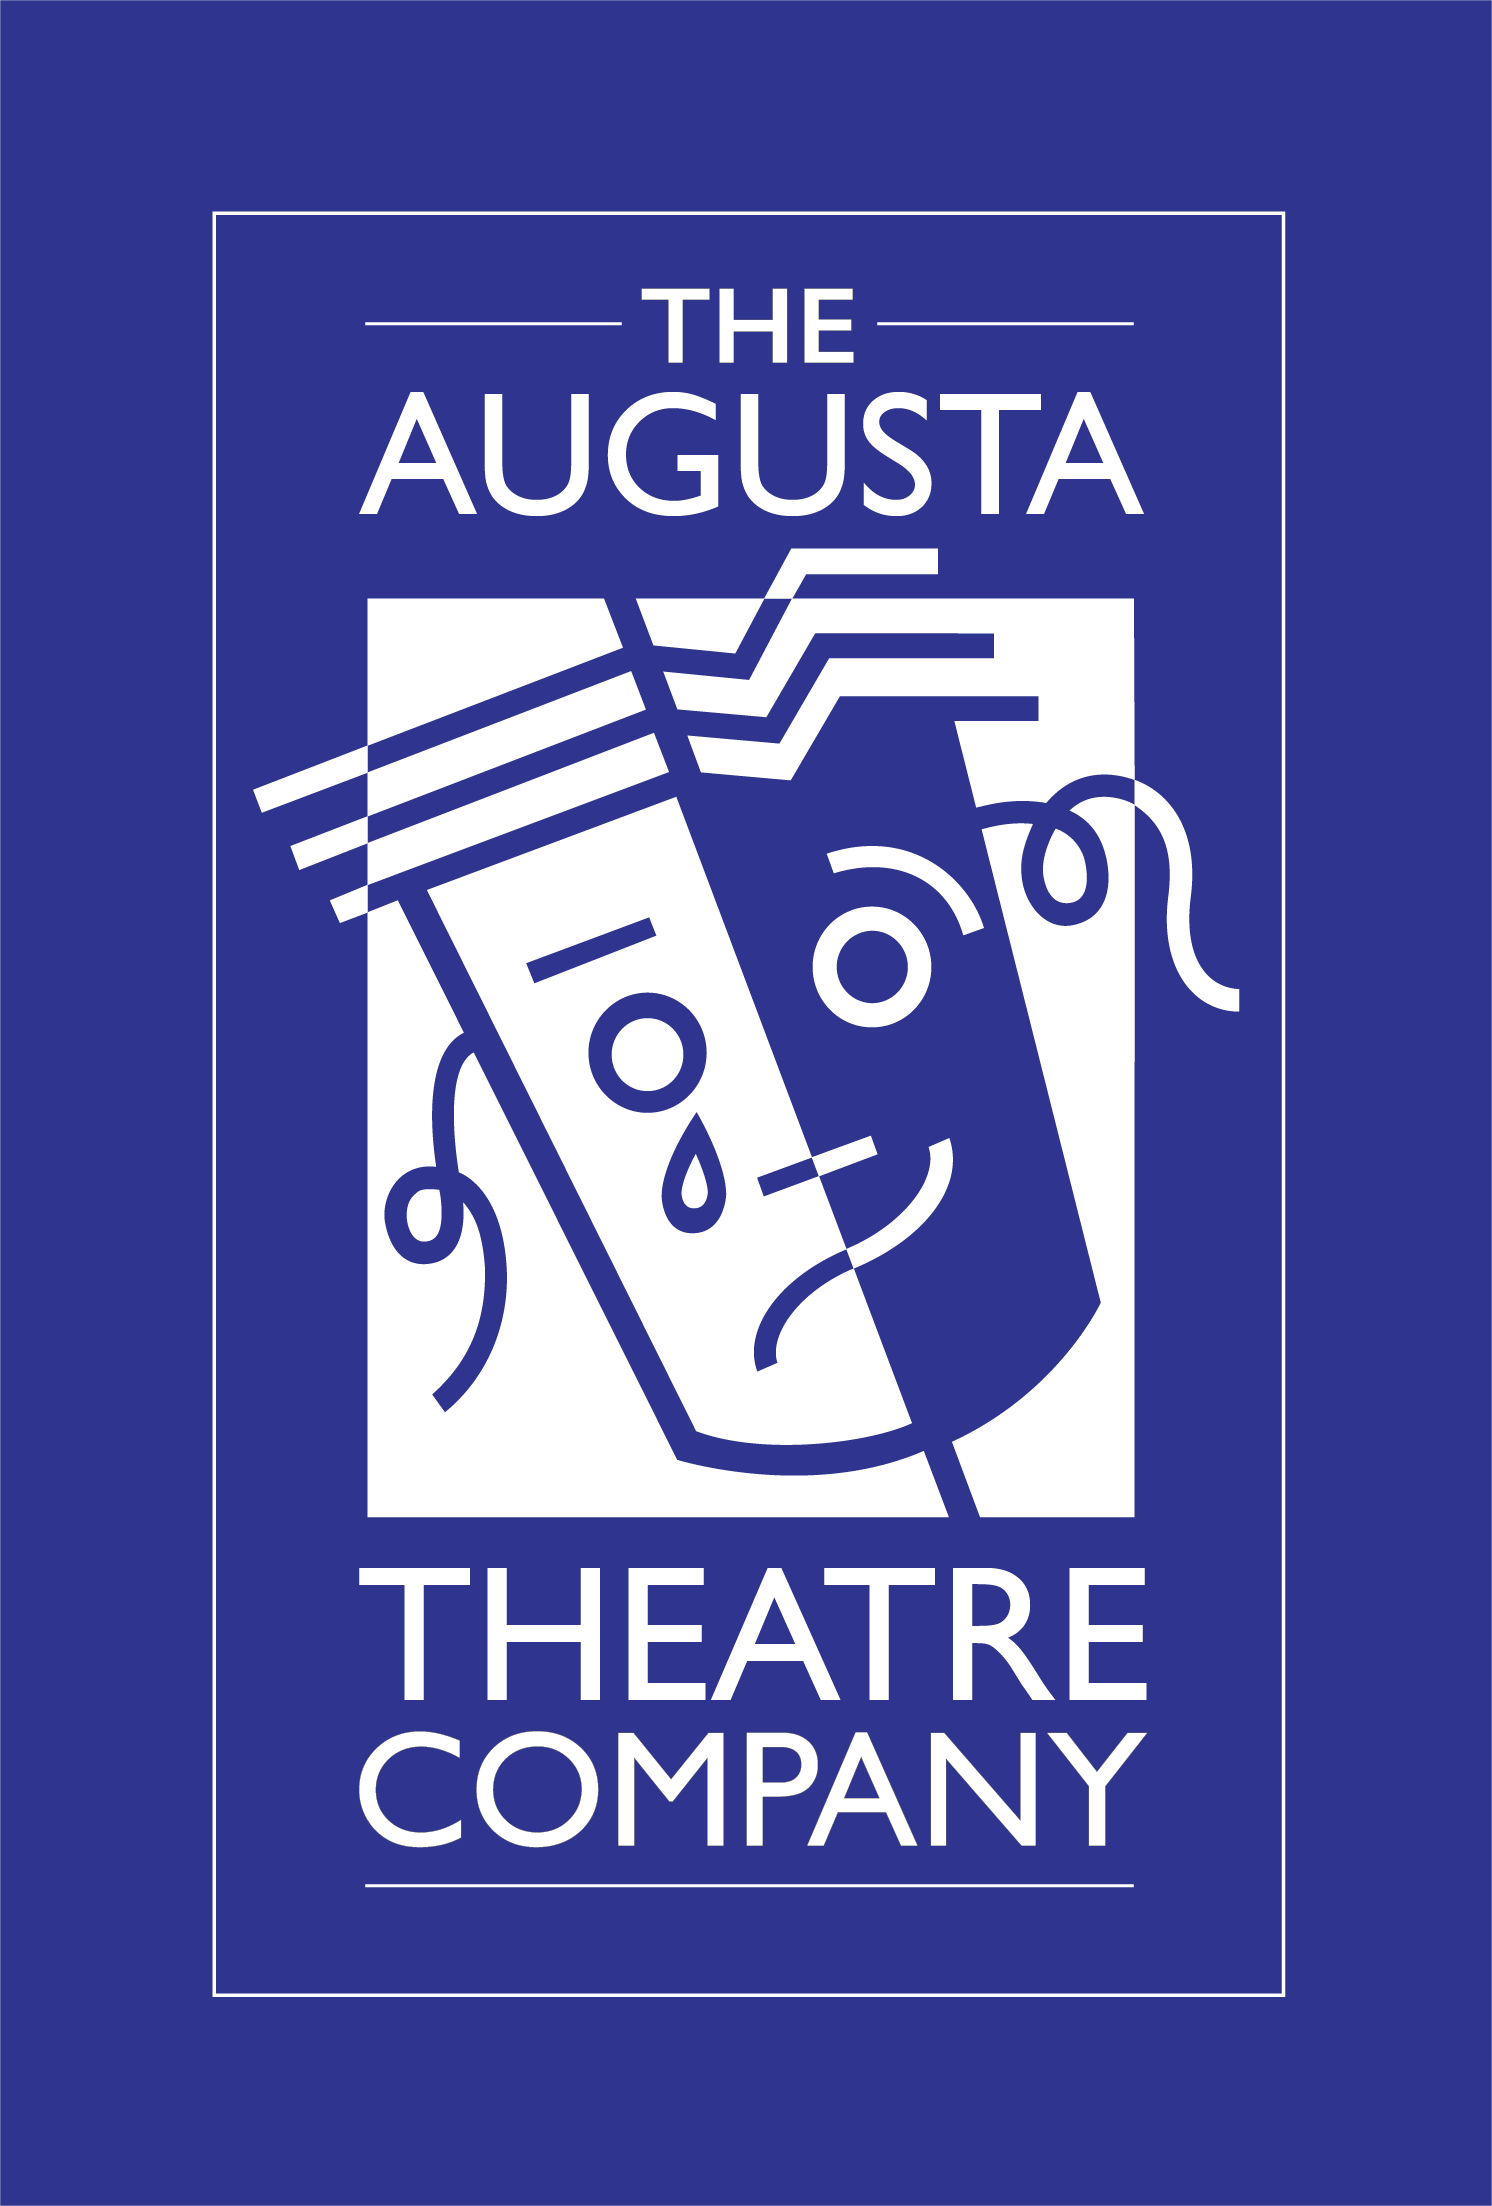 Augusta Theatre Company - Logo in white on brand blue background 